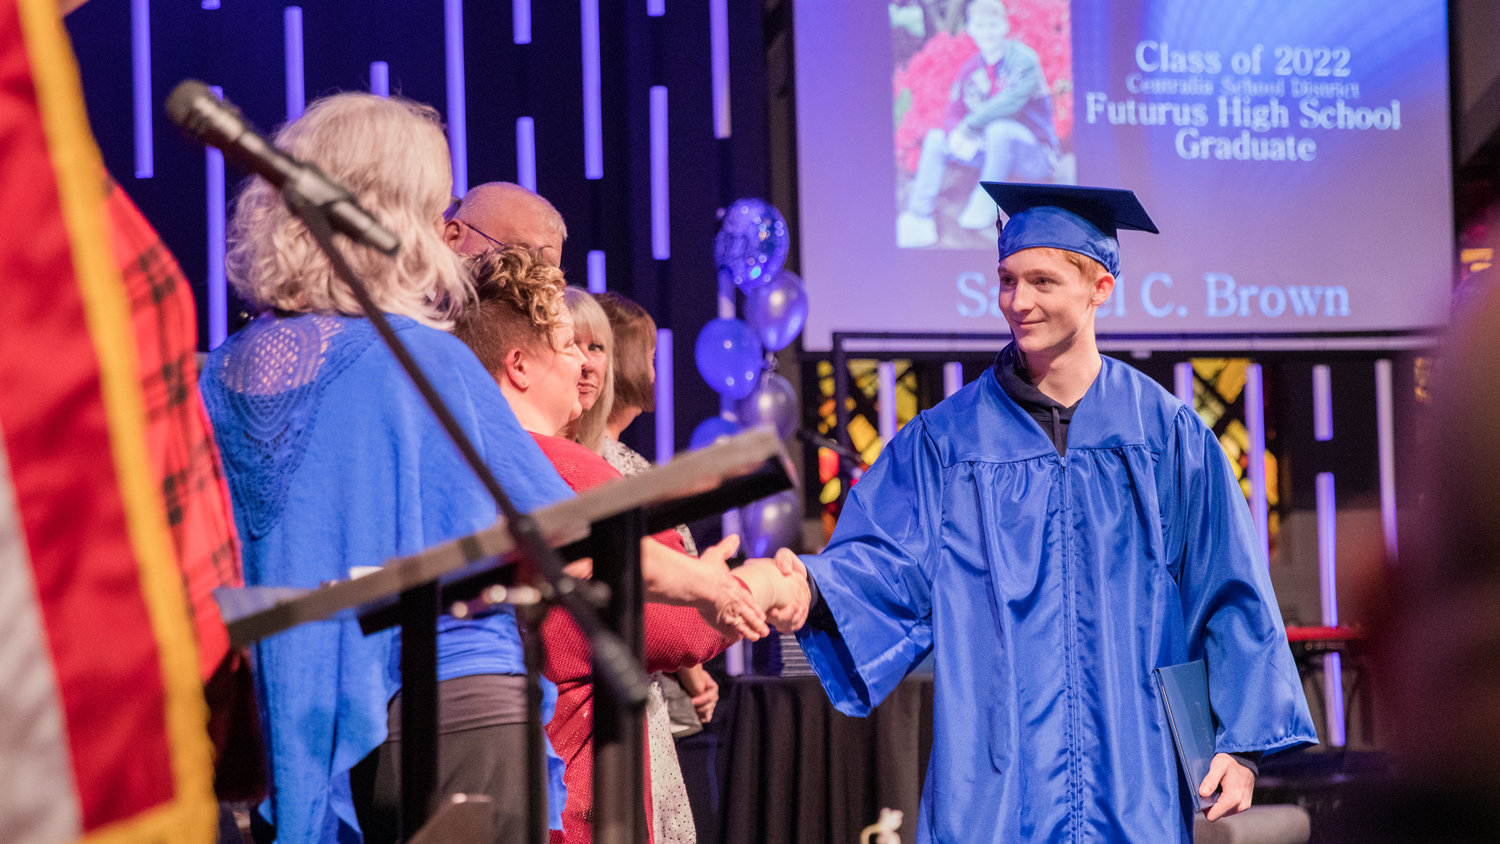 Samuel Brown smiles and shakes hands during a graduation ceremony for Futurus High School Tuesday in Centralia.